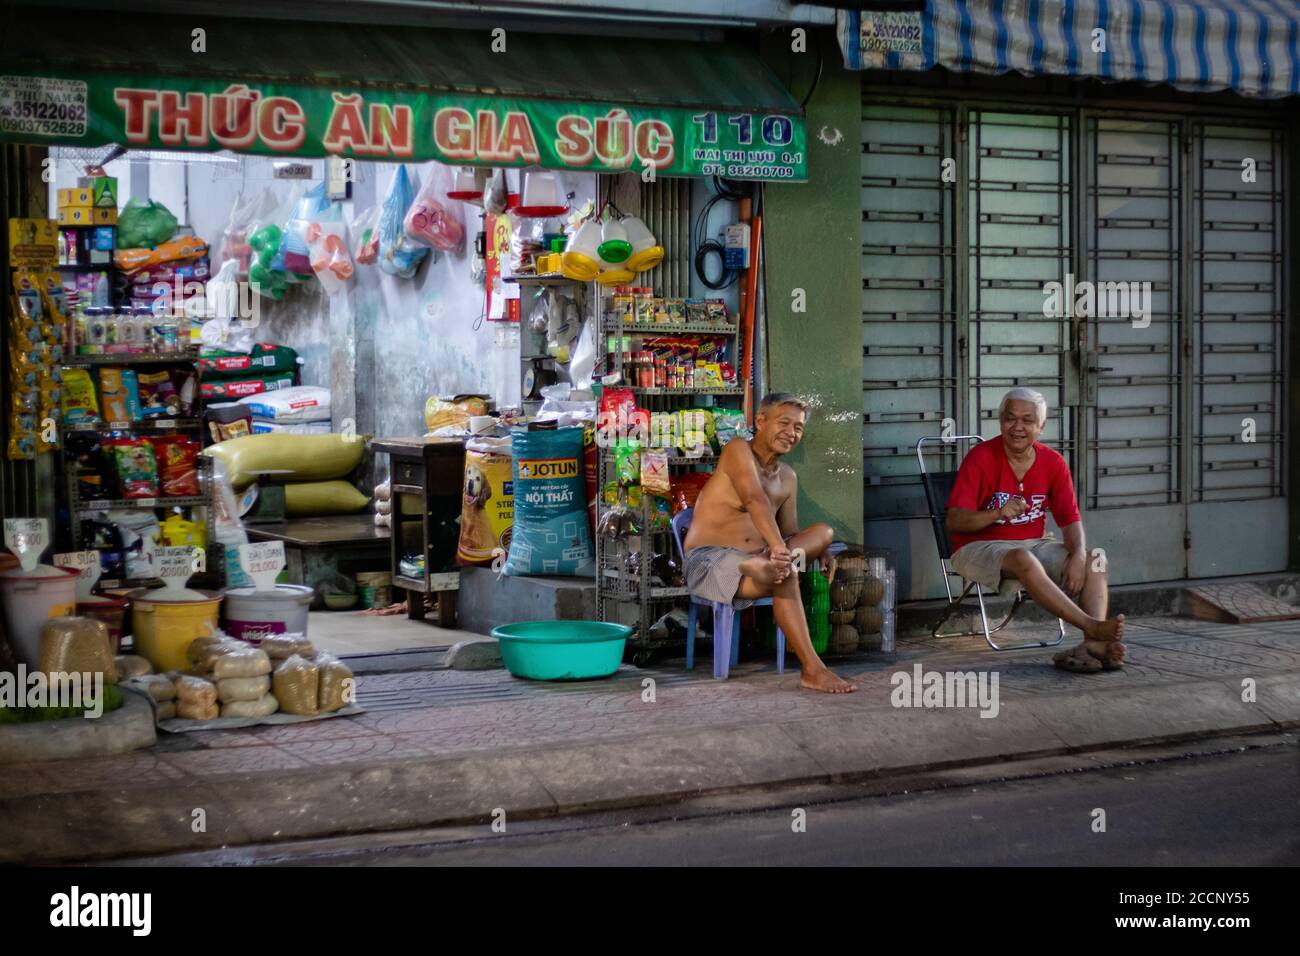 Processed pet food business open at night. Barefoot aged men chatting, chatting in front of the shop, sitting on chairs. Ho chi Minh, Saigon, Vietnam Stock Photo